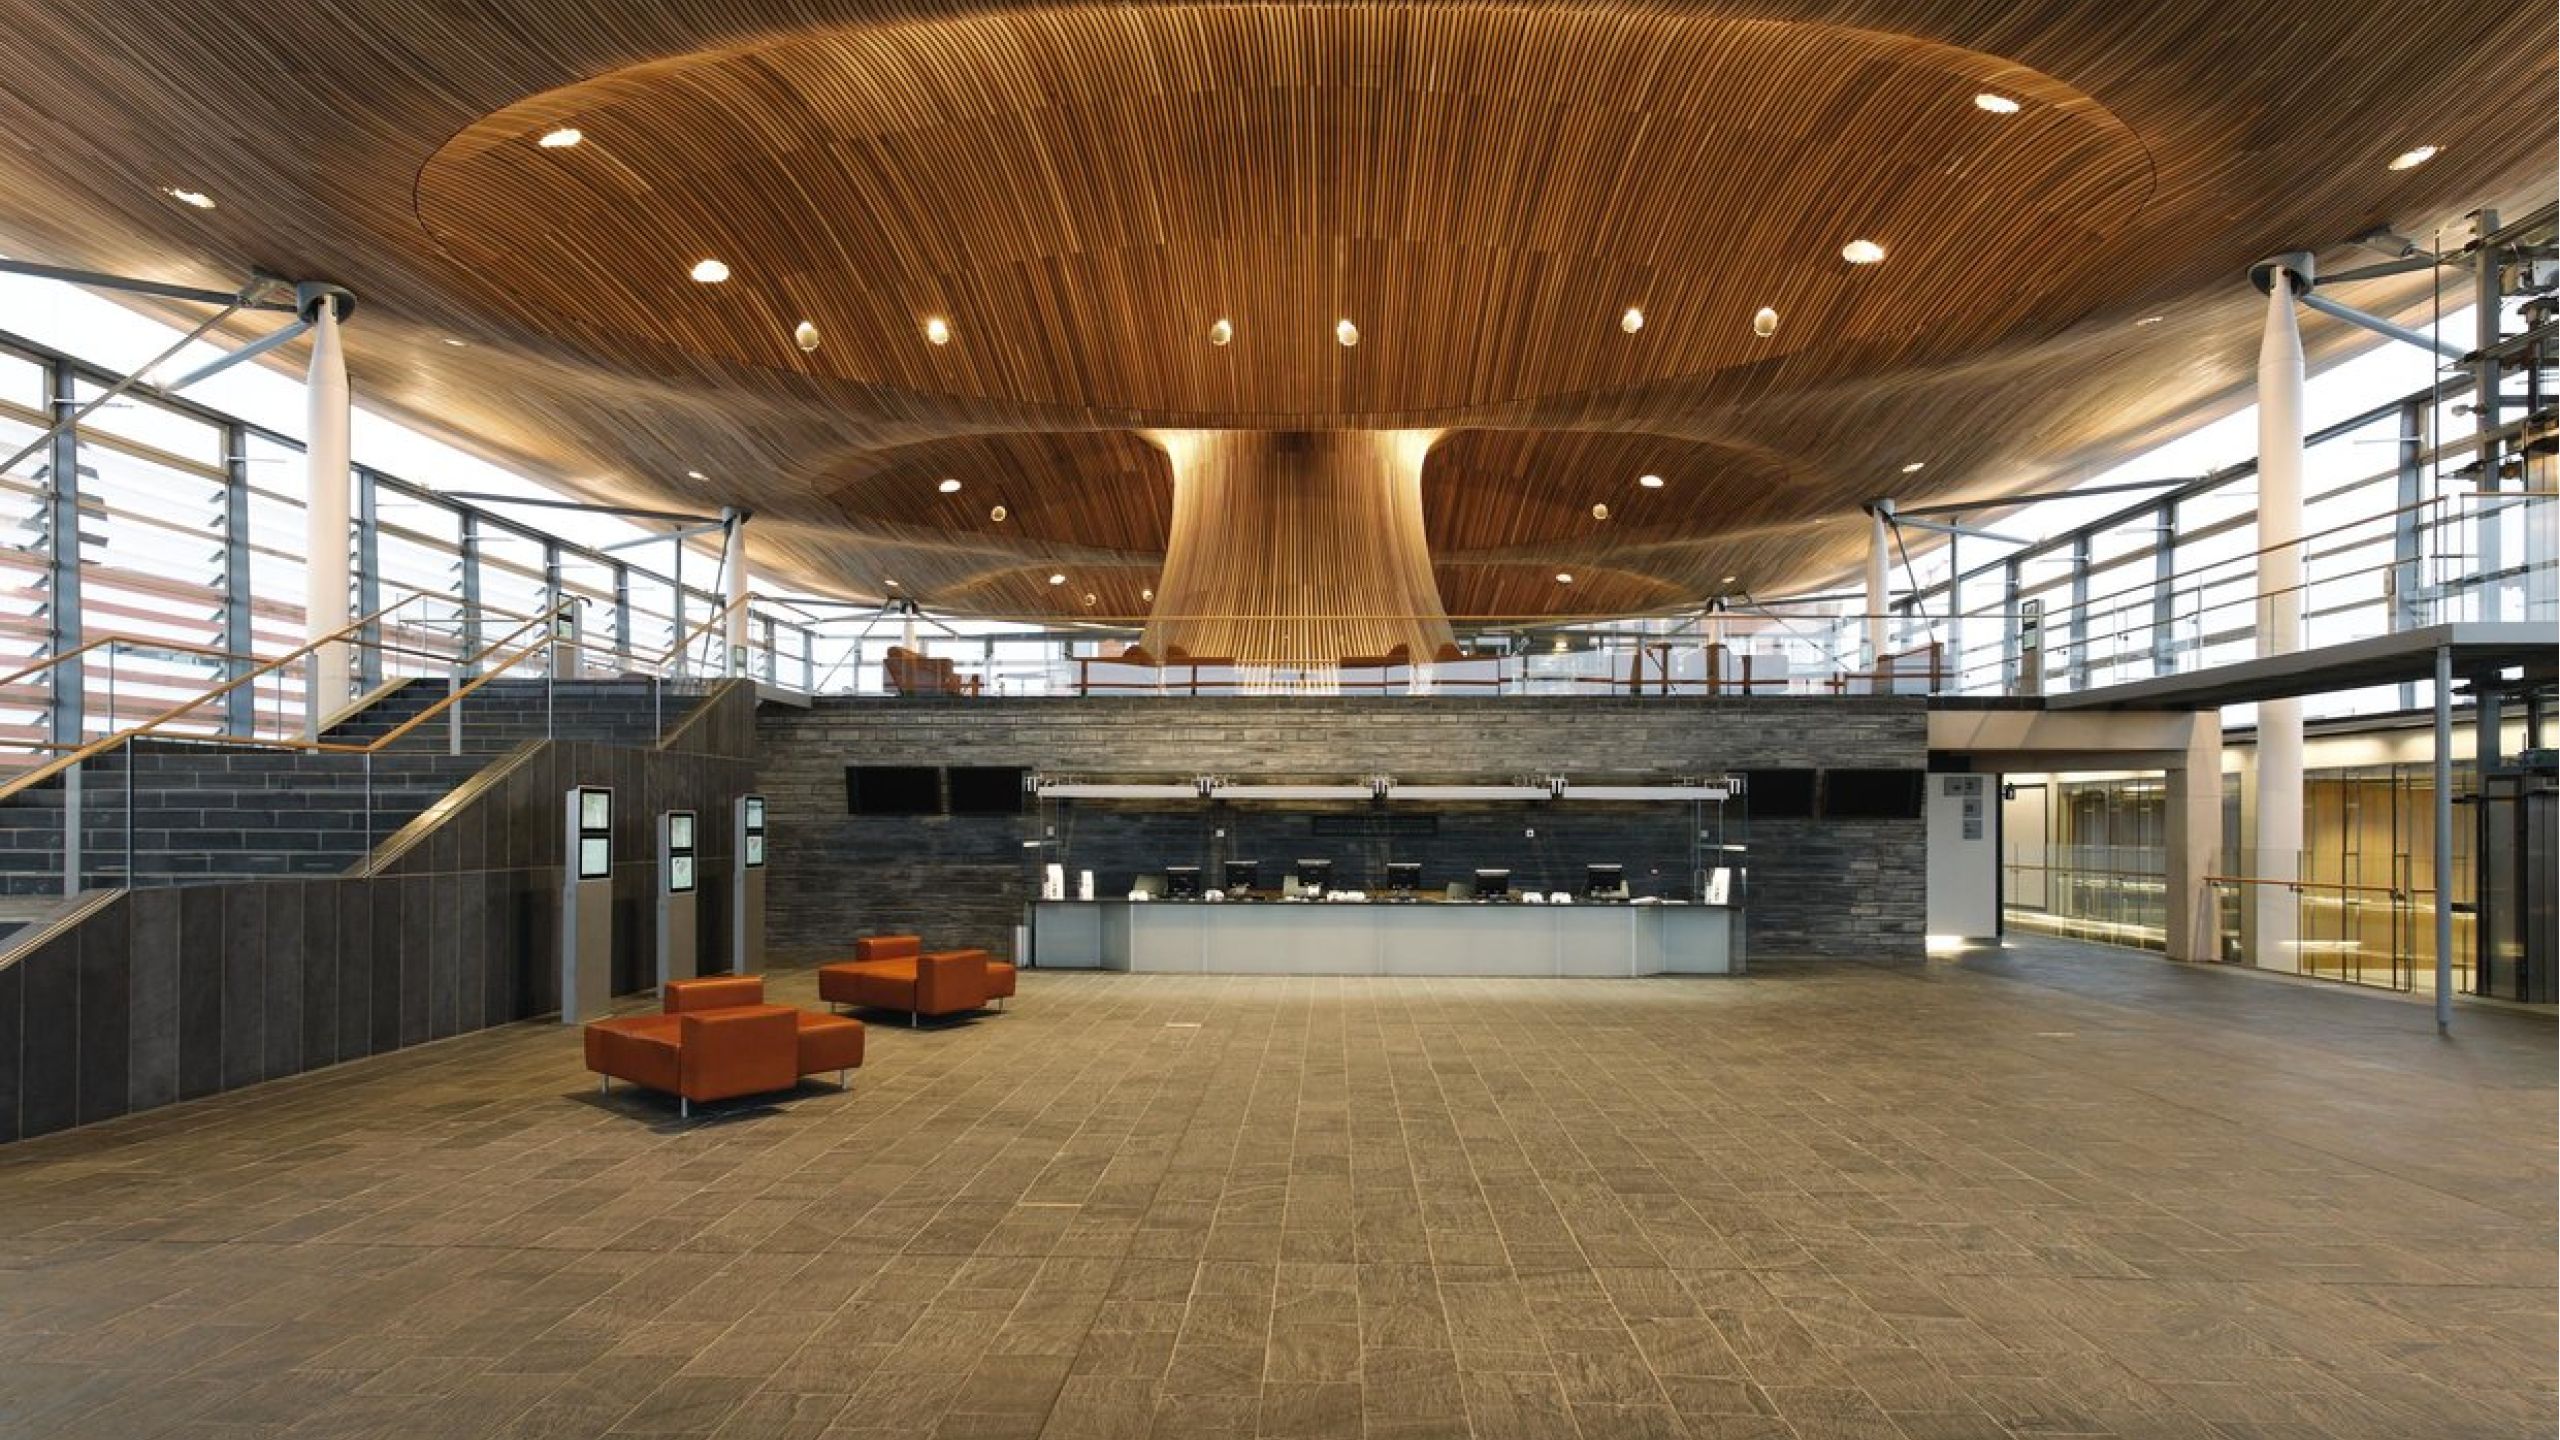 Curved Timber Ceilings at the Welsh Assembly